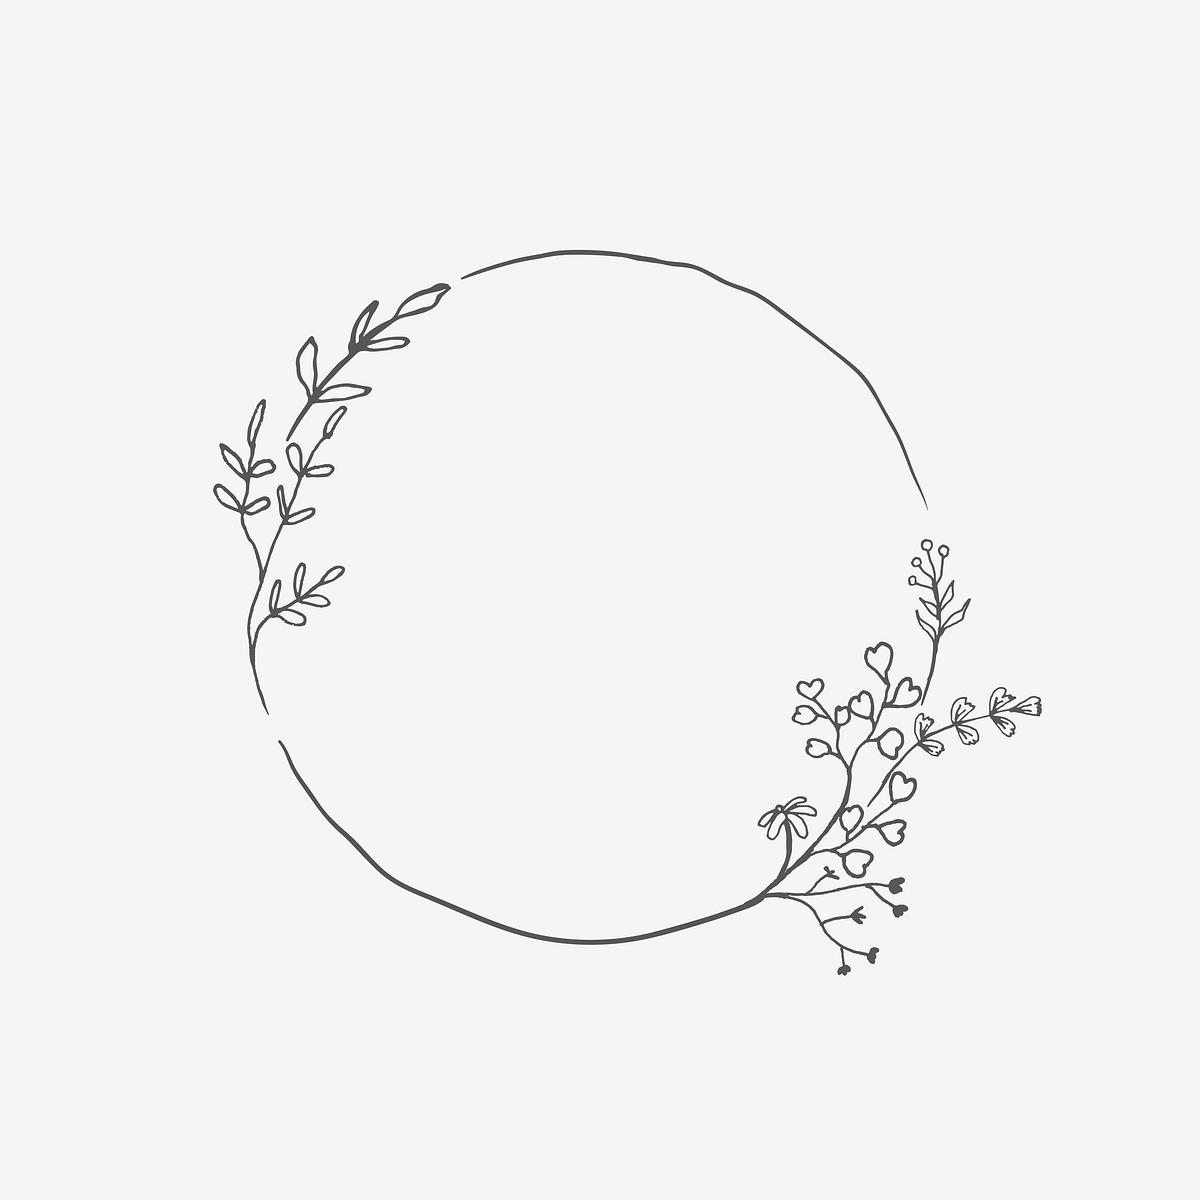 Download Hand drawn floral frame | Royalty free stock illustration ...